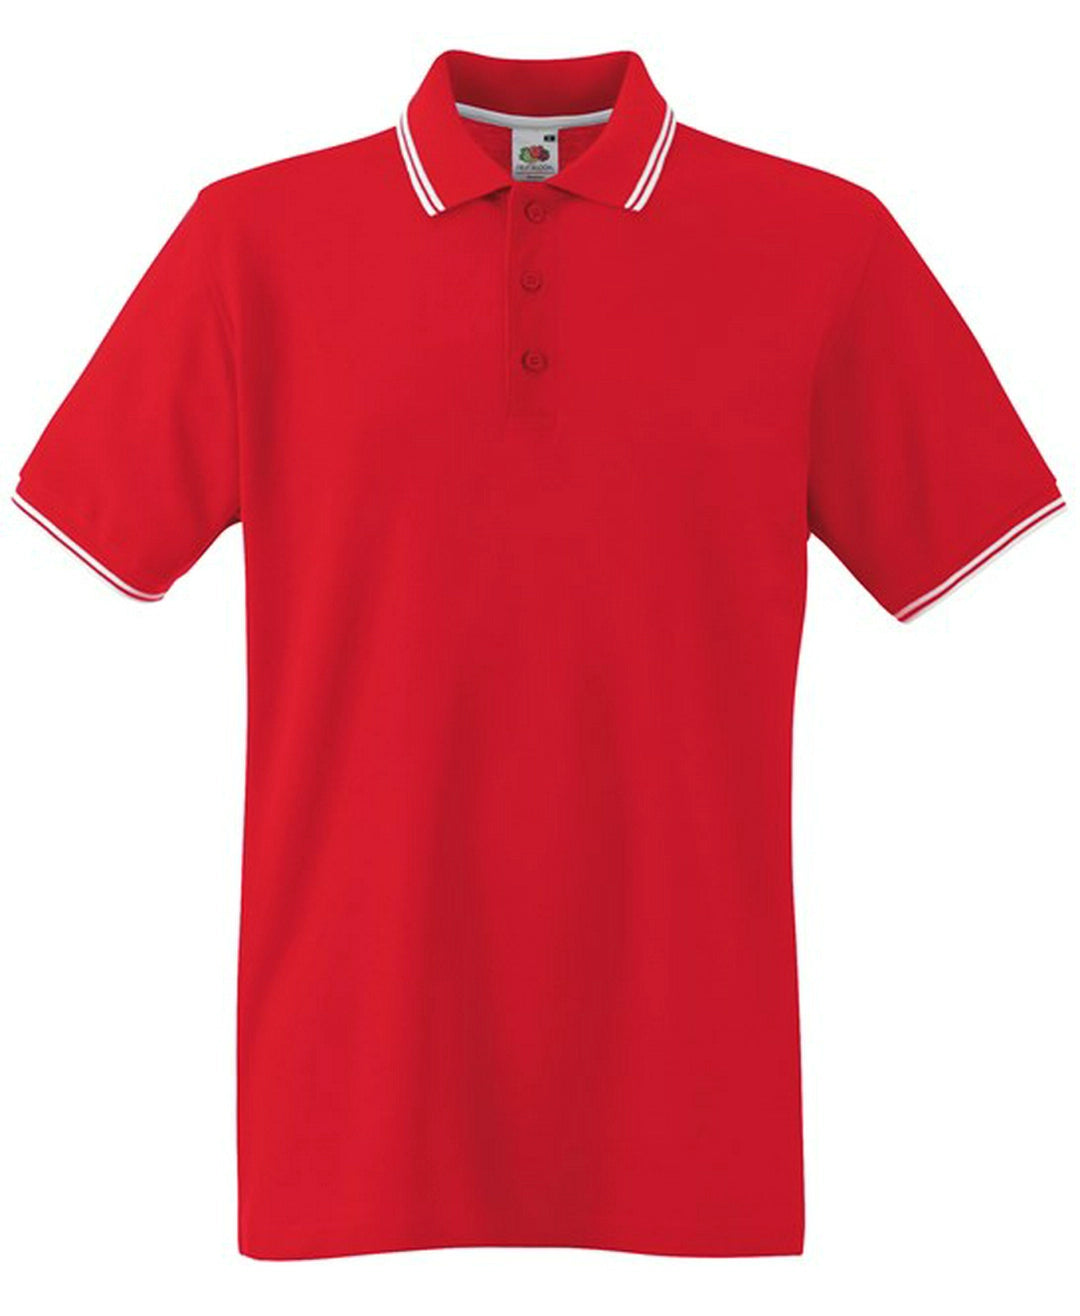 Tipped Cotton Polo Shirt 180gsm Adult - COOZO